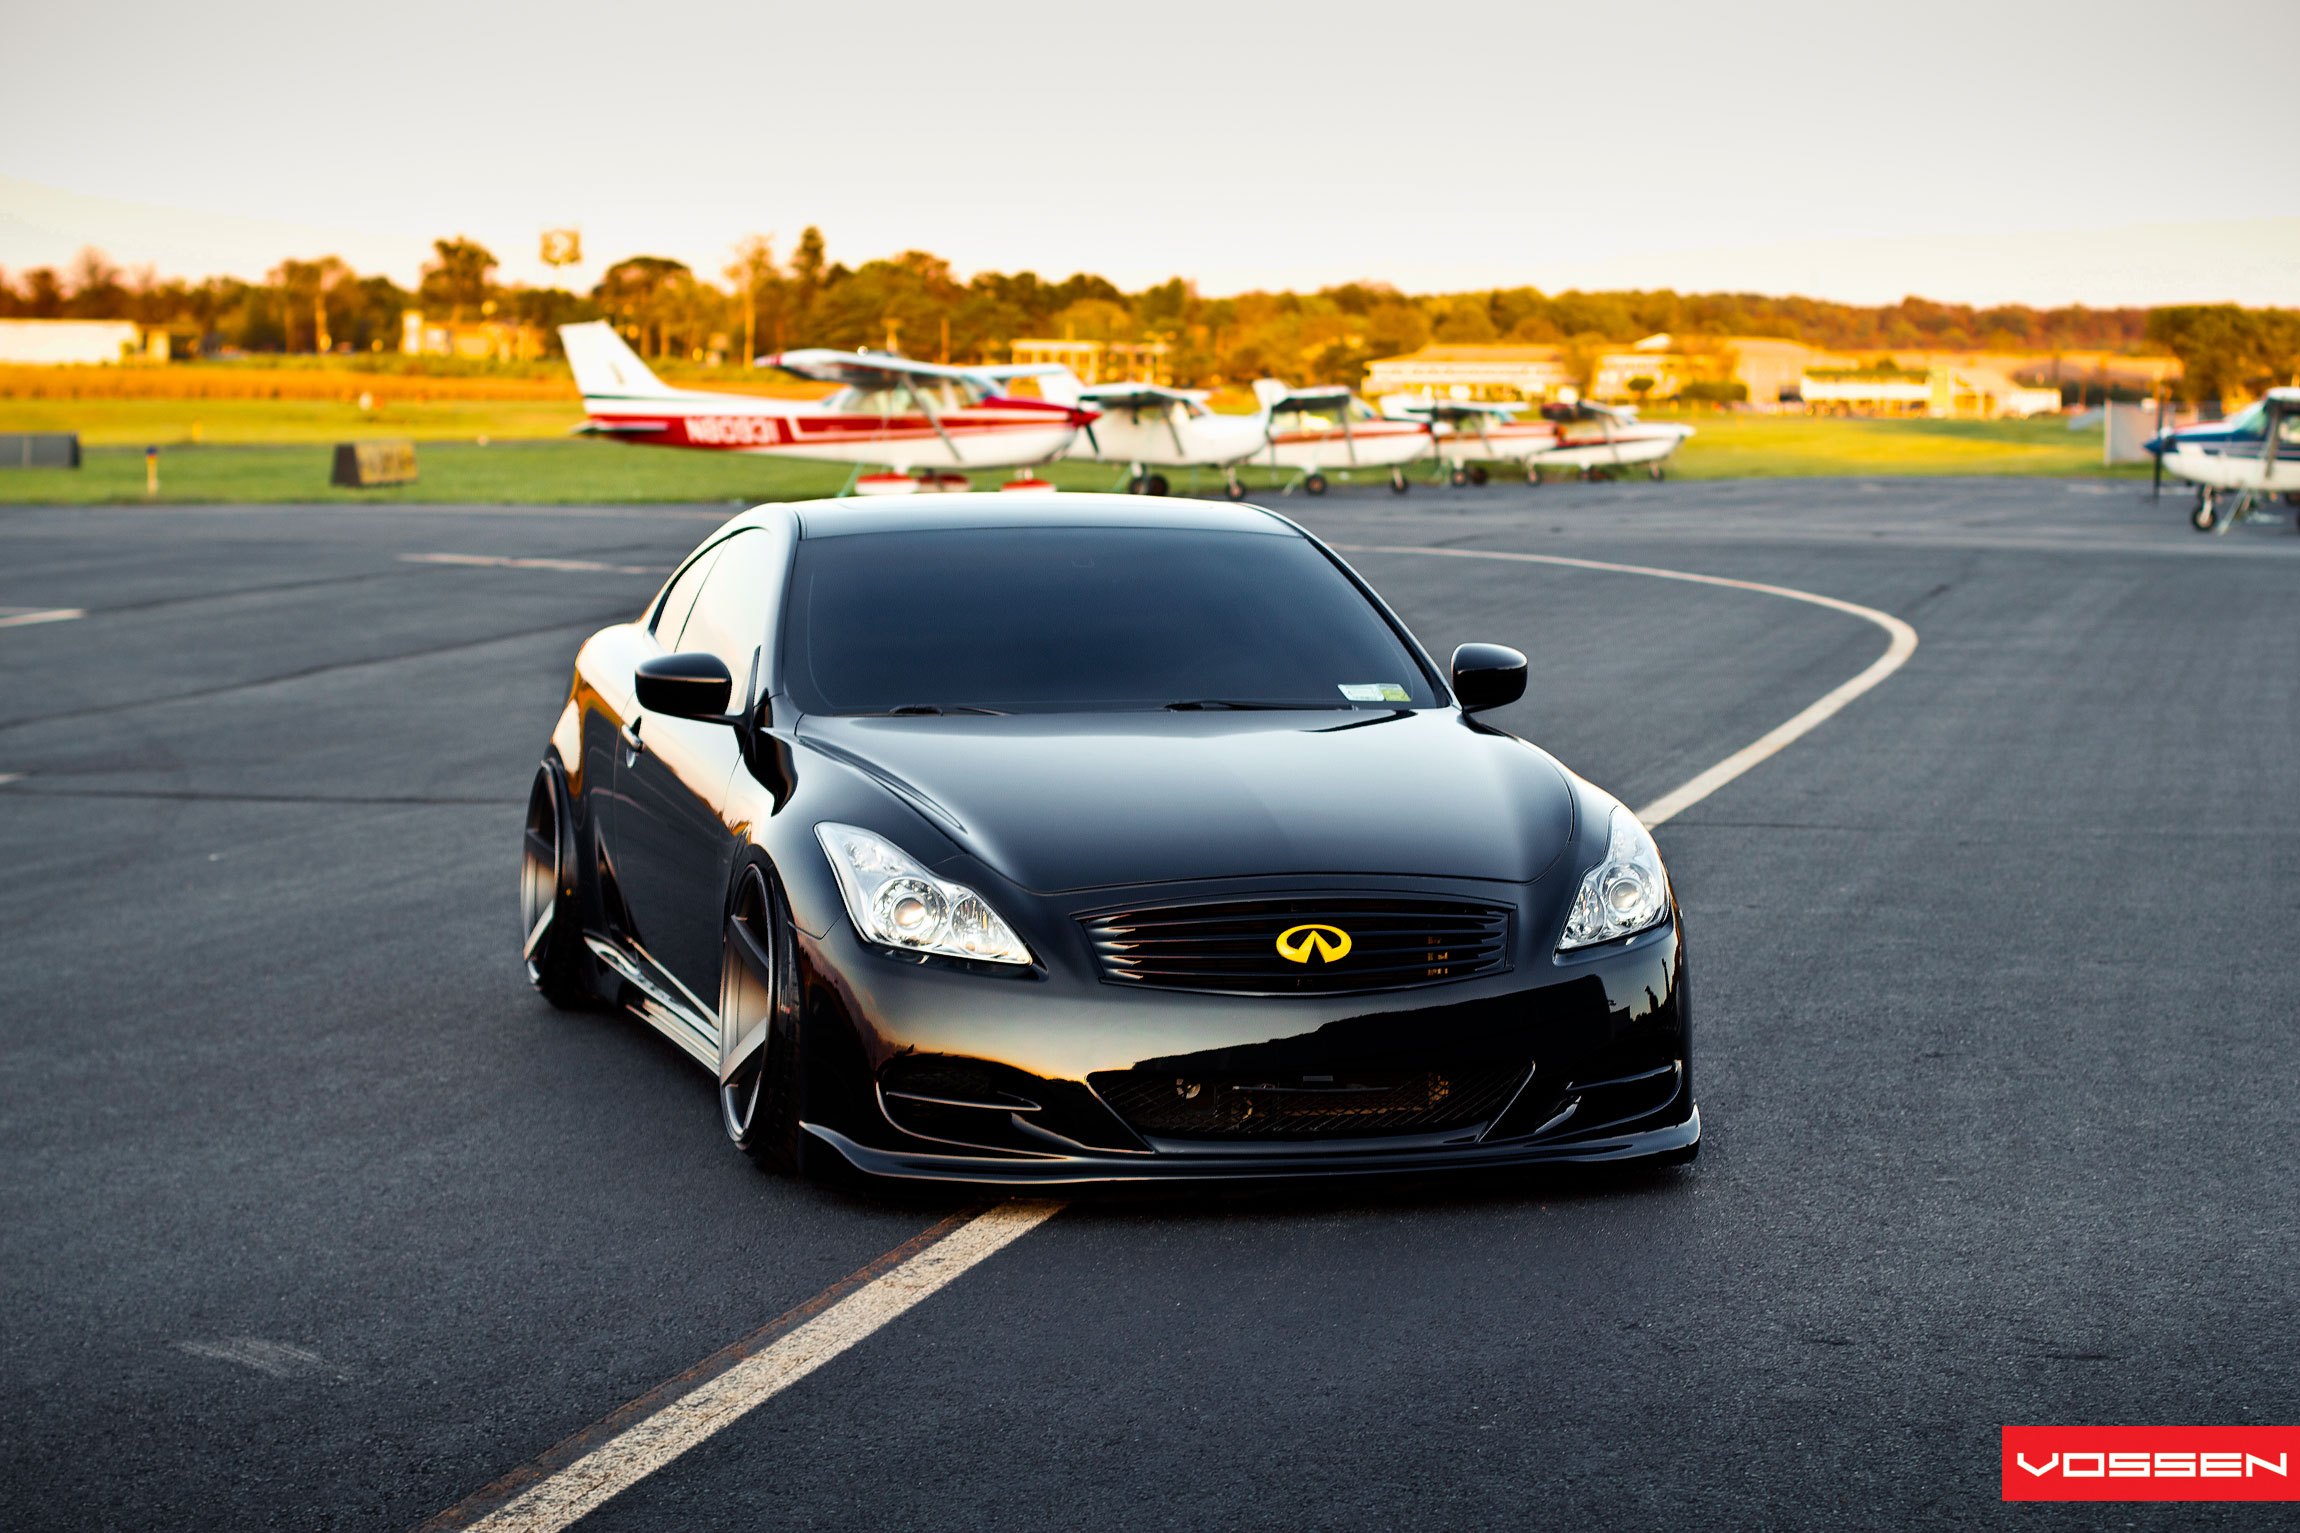 Stunning Blacked-out Infiniti G37 Coupe With Deep Concave Vossen Rims ...